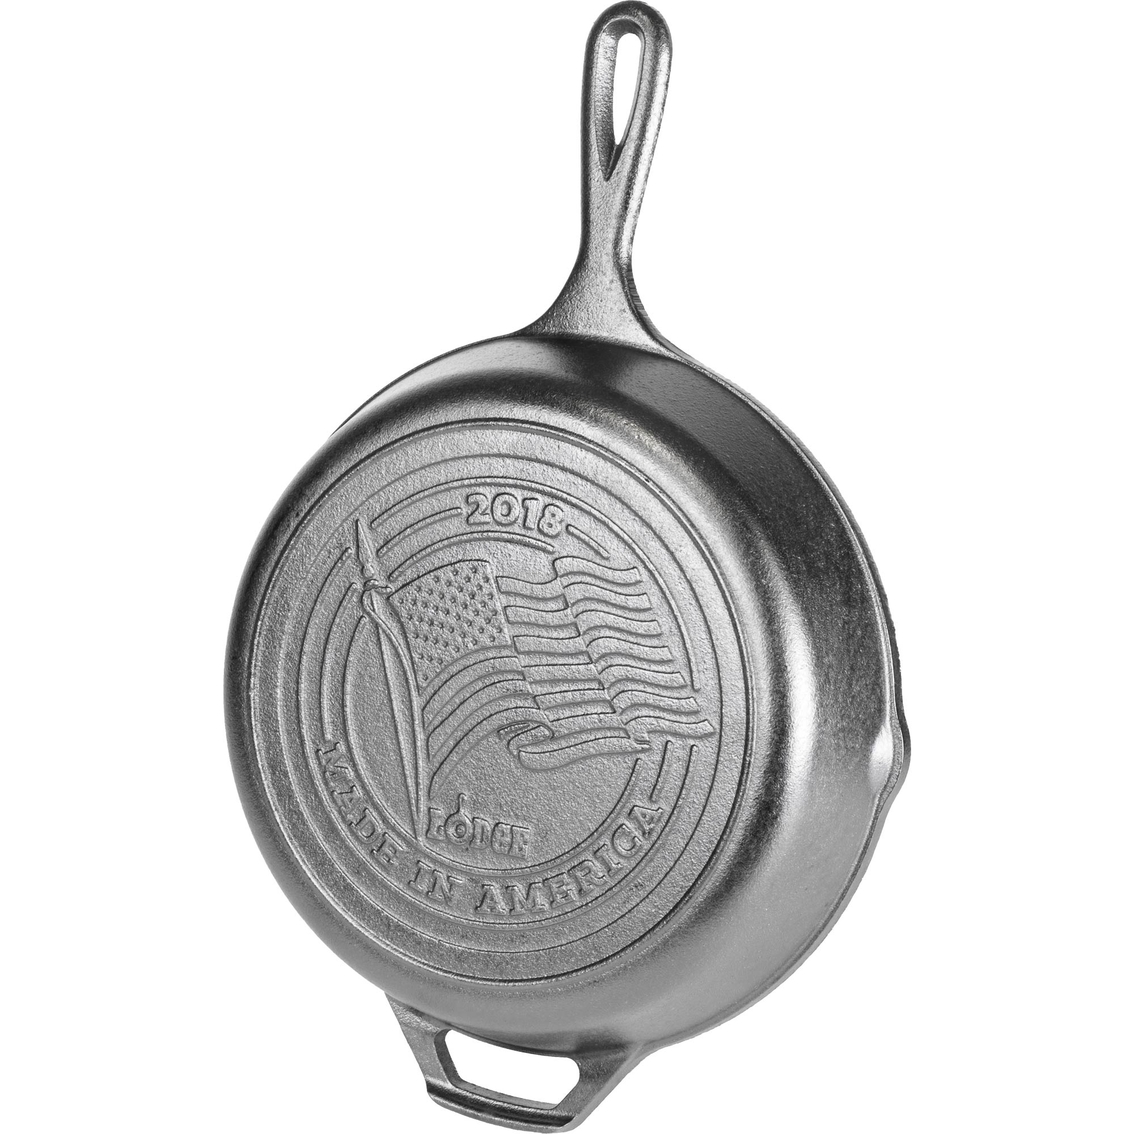 Lodge Cast Iron Essential Cast Iron Pan Set - 10.25-in Skillet